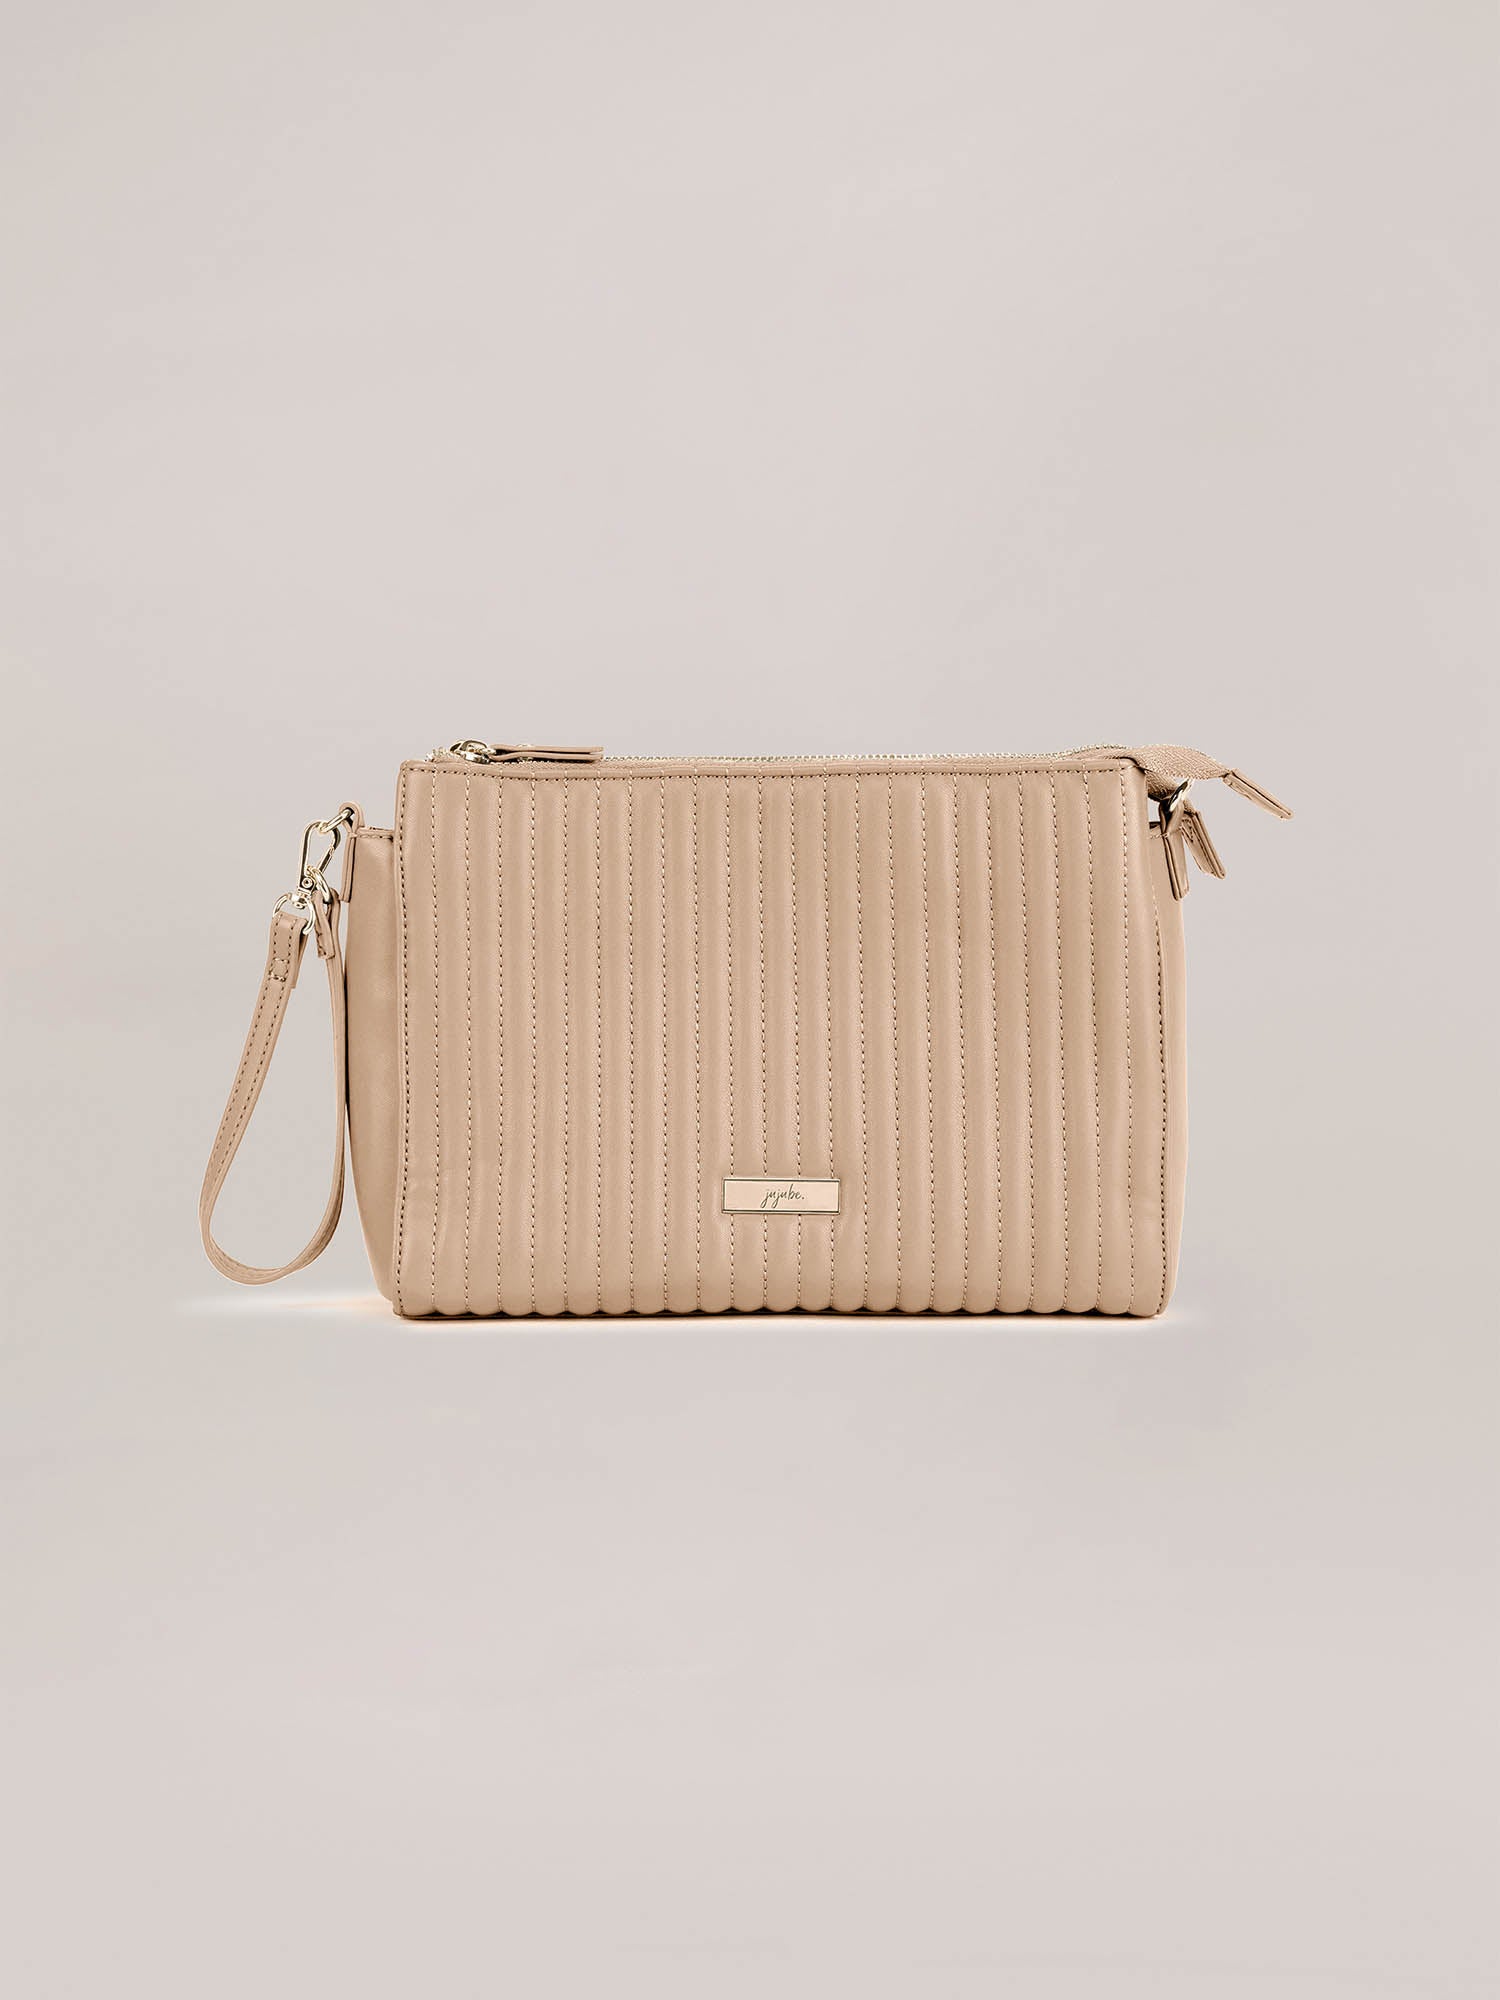 DKNY Beige Quilted Cross Body Bag, Gently Used